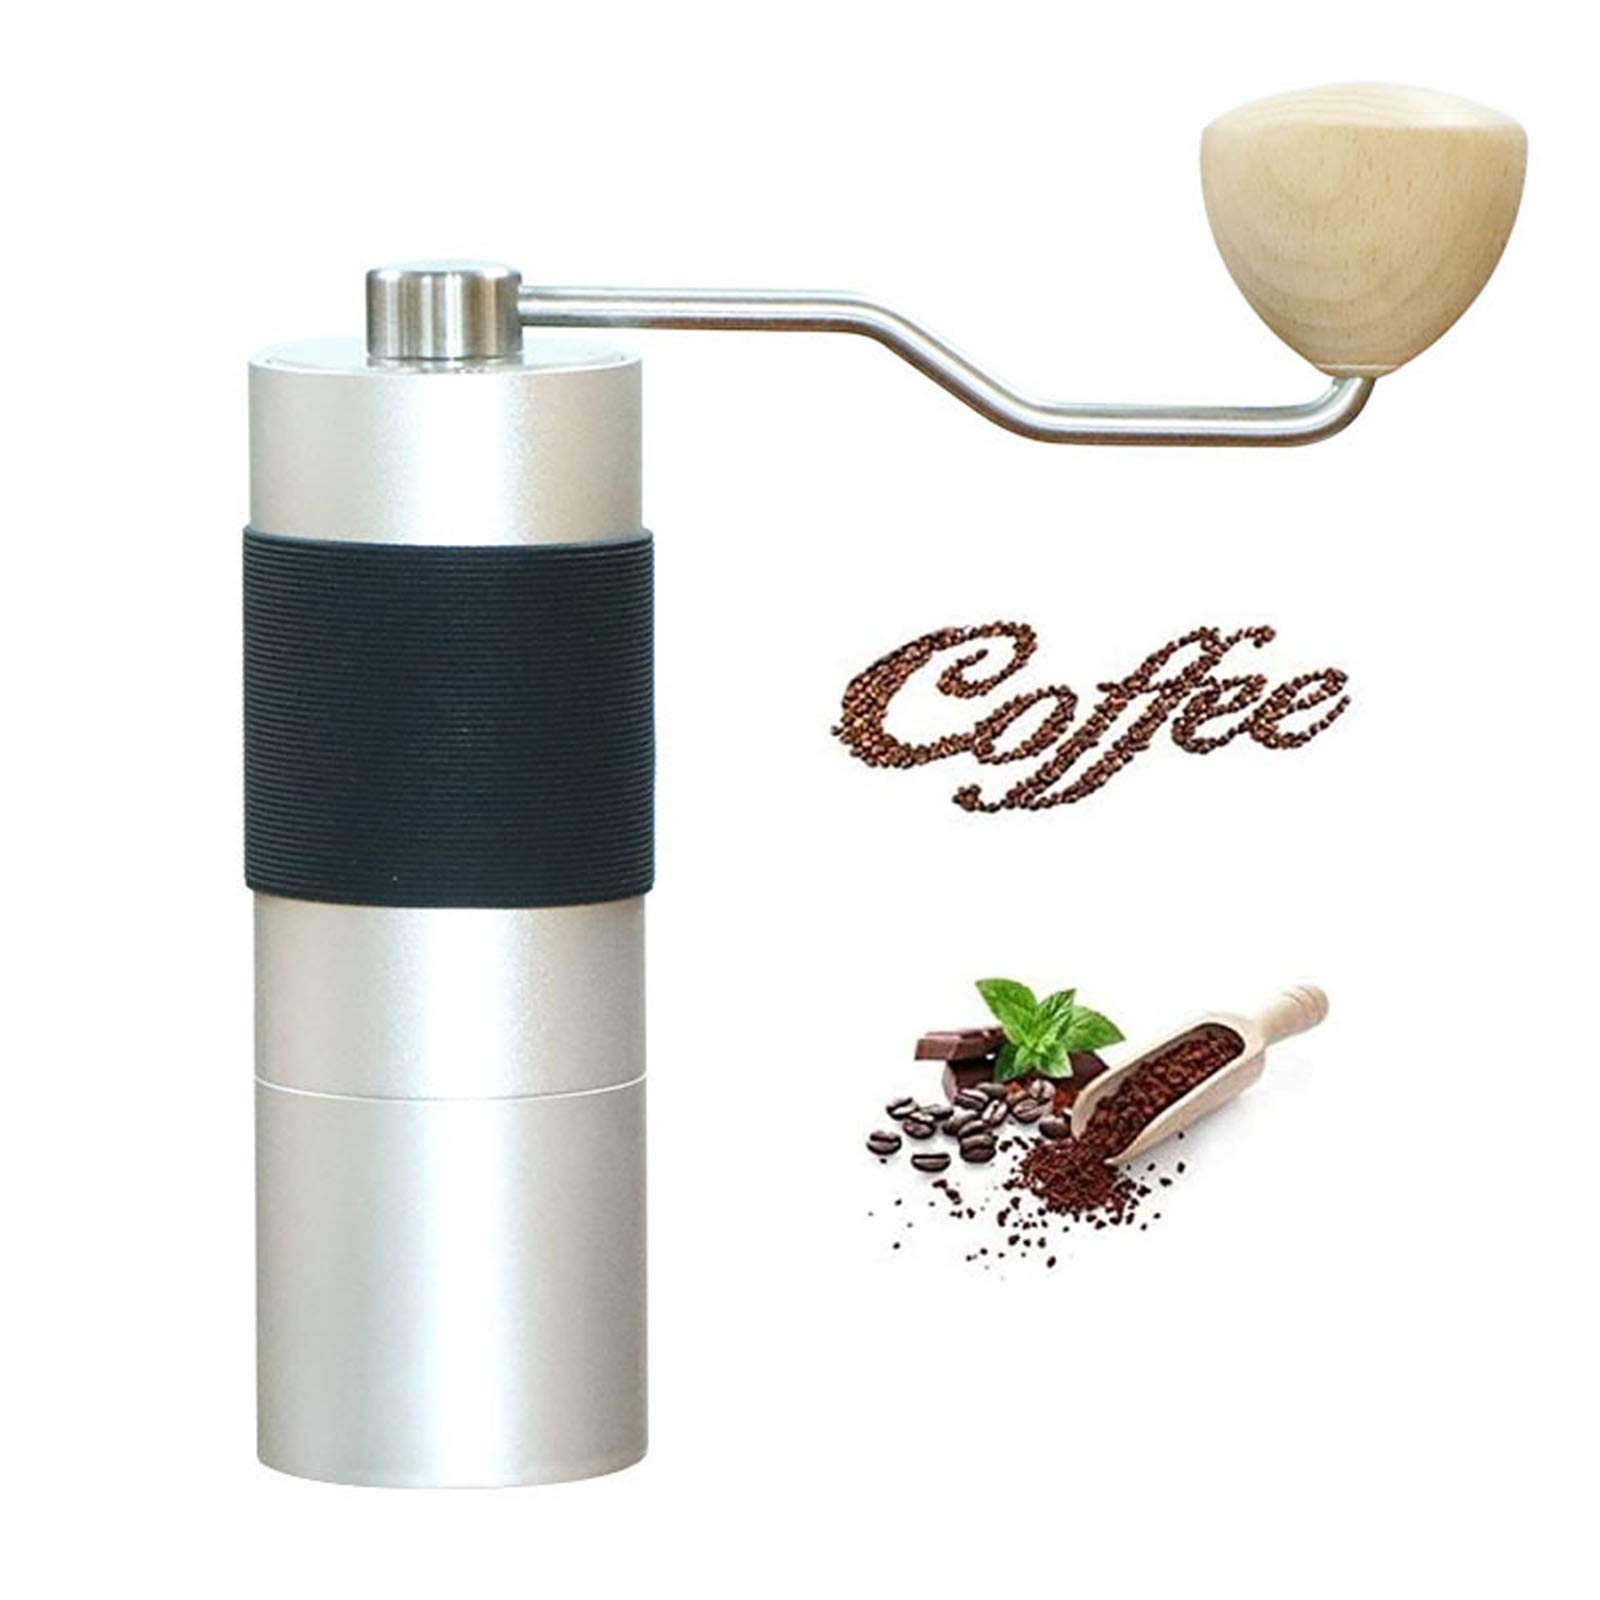 QJJML 2020 Upgraded Manual Coffee Grinder Burr Coffee Grinder Grinder Adjustable Setting Portable Hand Crank Coffee Bean Conical Mill for Espresso,French Press Coffee for Hand Grinder Gift,Beige